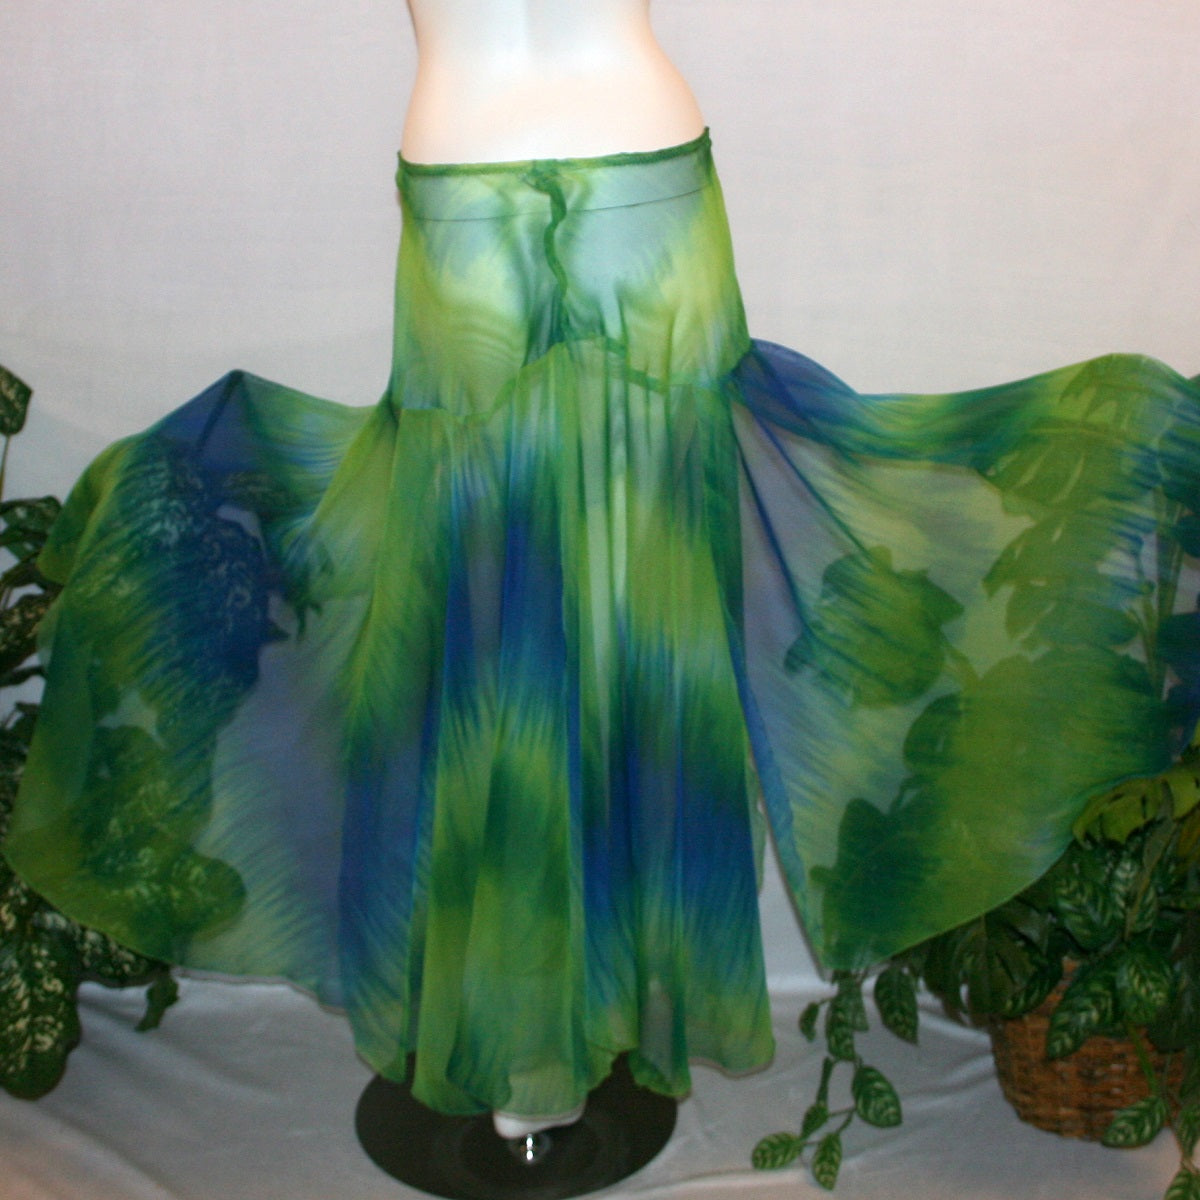 flaired back view of Blue & green ballroom skirt created in yards of a gorgeous blue & green variegated chiffon, flows beautifully for your waltzes & foxtrots.